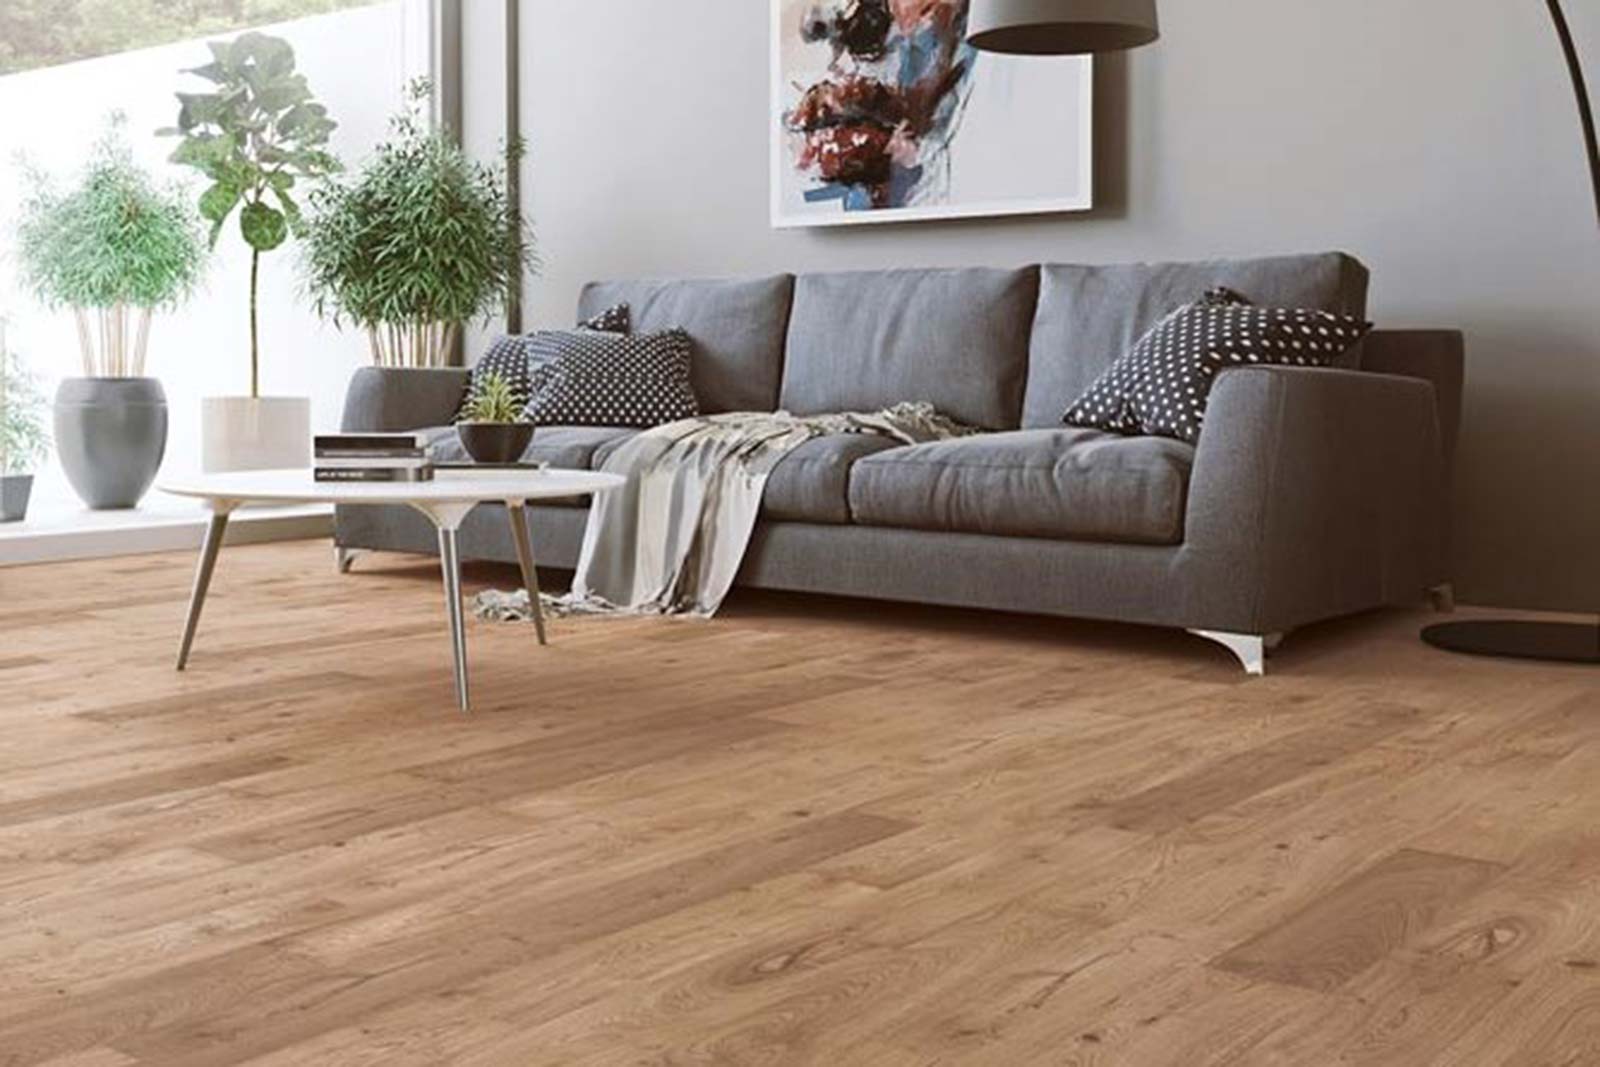 Adelaide Flooring Products: Riviera Oak